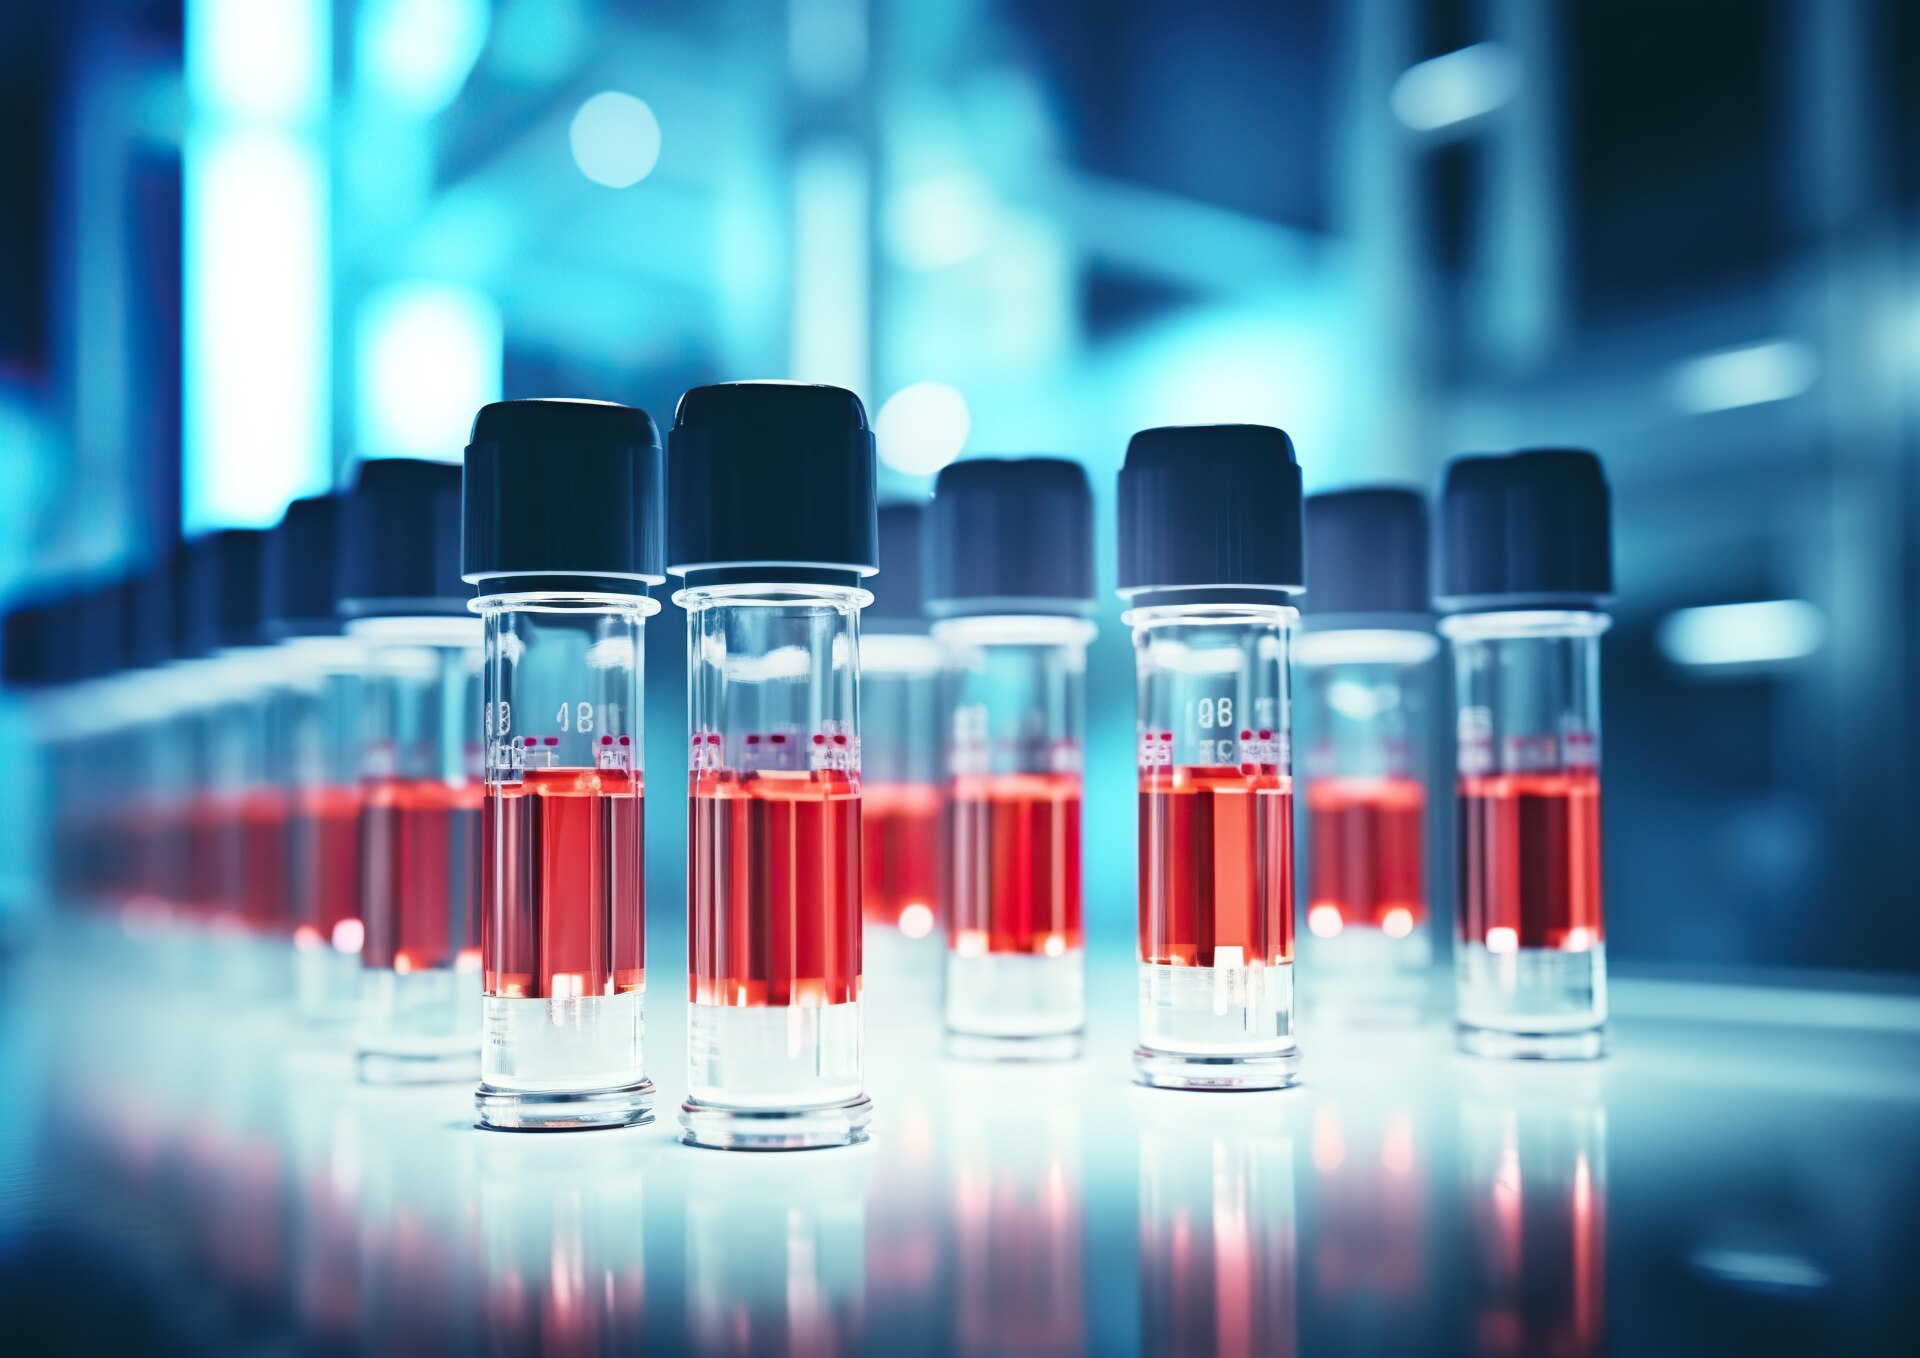 Rows of vials containing red chemical liquid, labeled and capped, on a laboratory bench with a blue illuminated background.